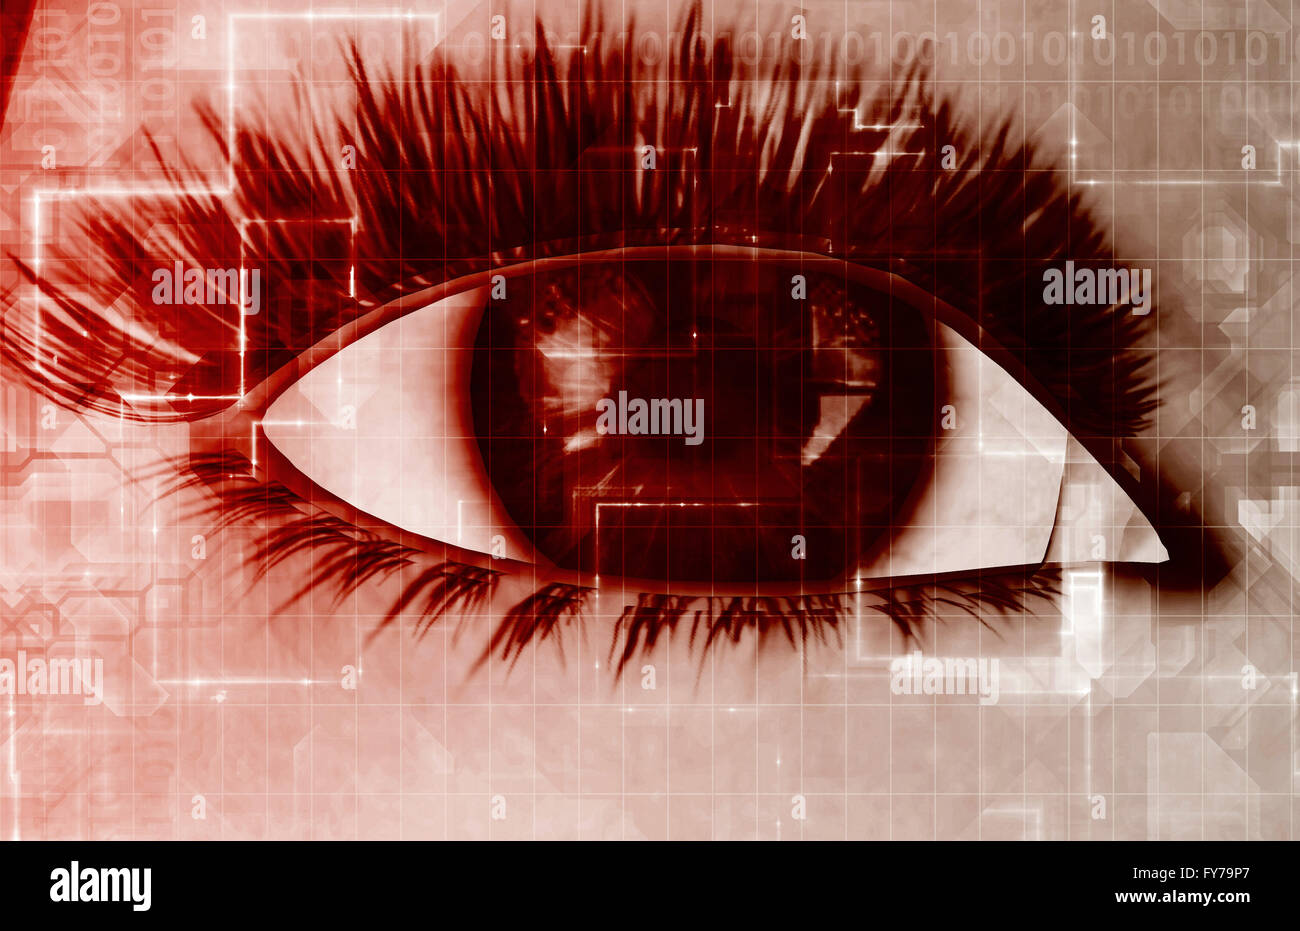 Online Privacy with Big Brother Intercepting Personal Data Stock Photo